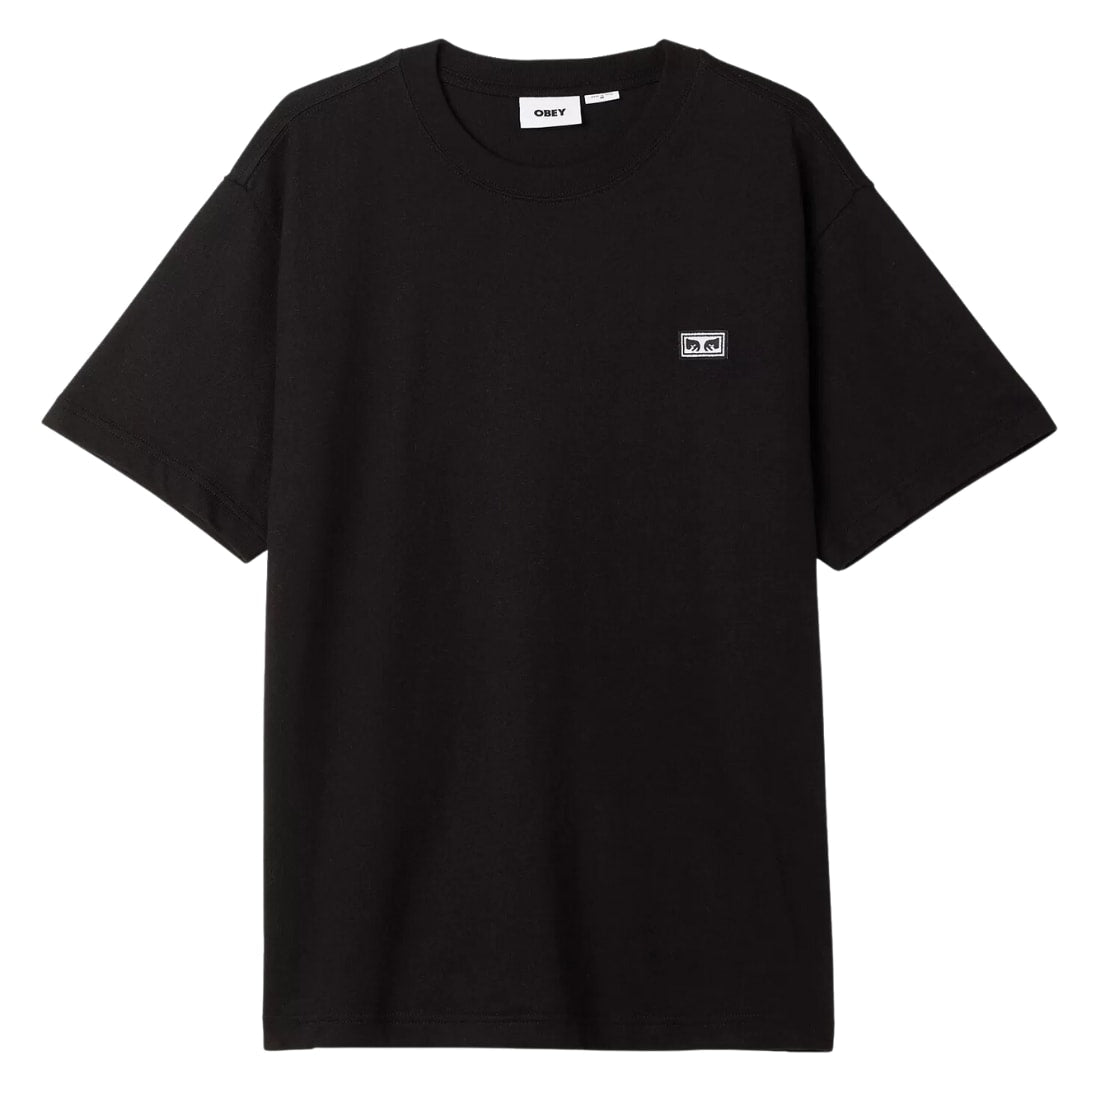 Obey Established Works Eyes T-Shirt - Black - Mens Graphic T-Shirt by Obey